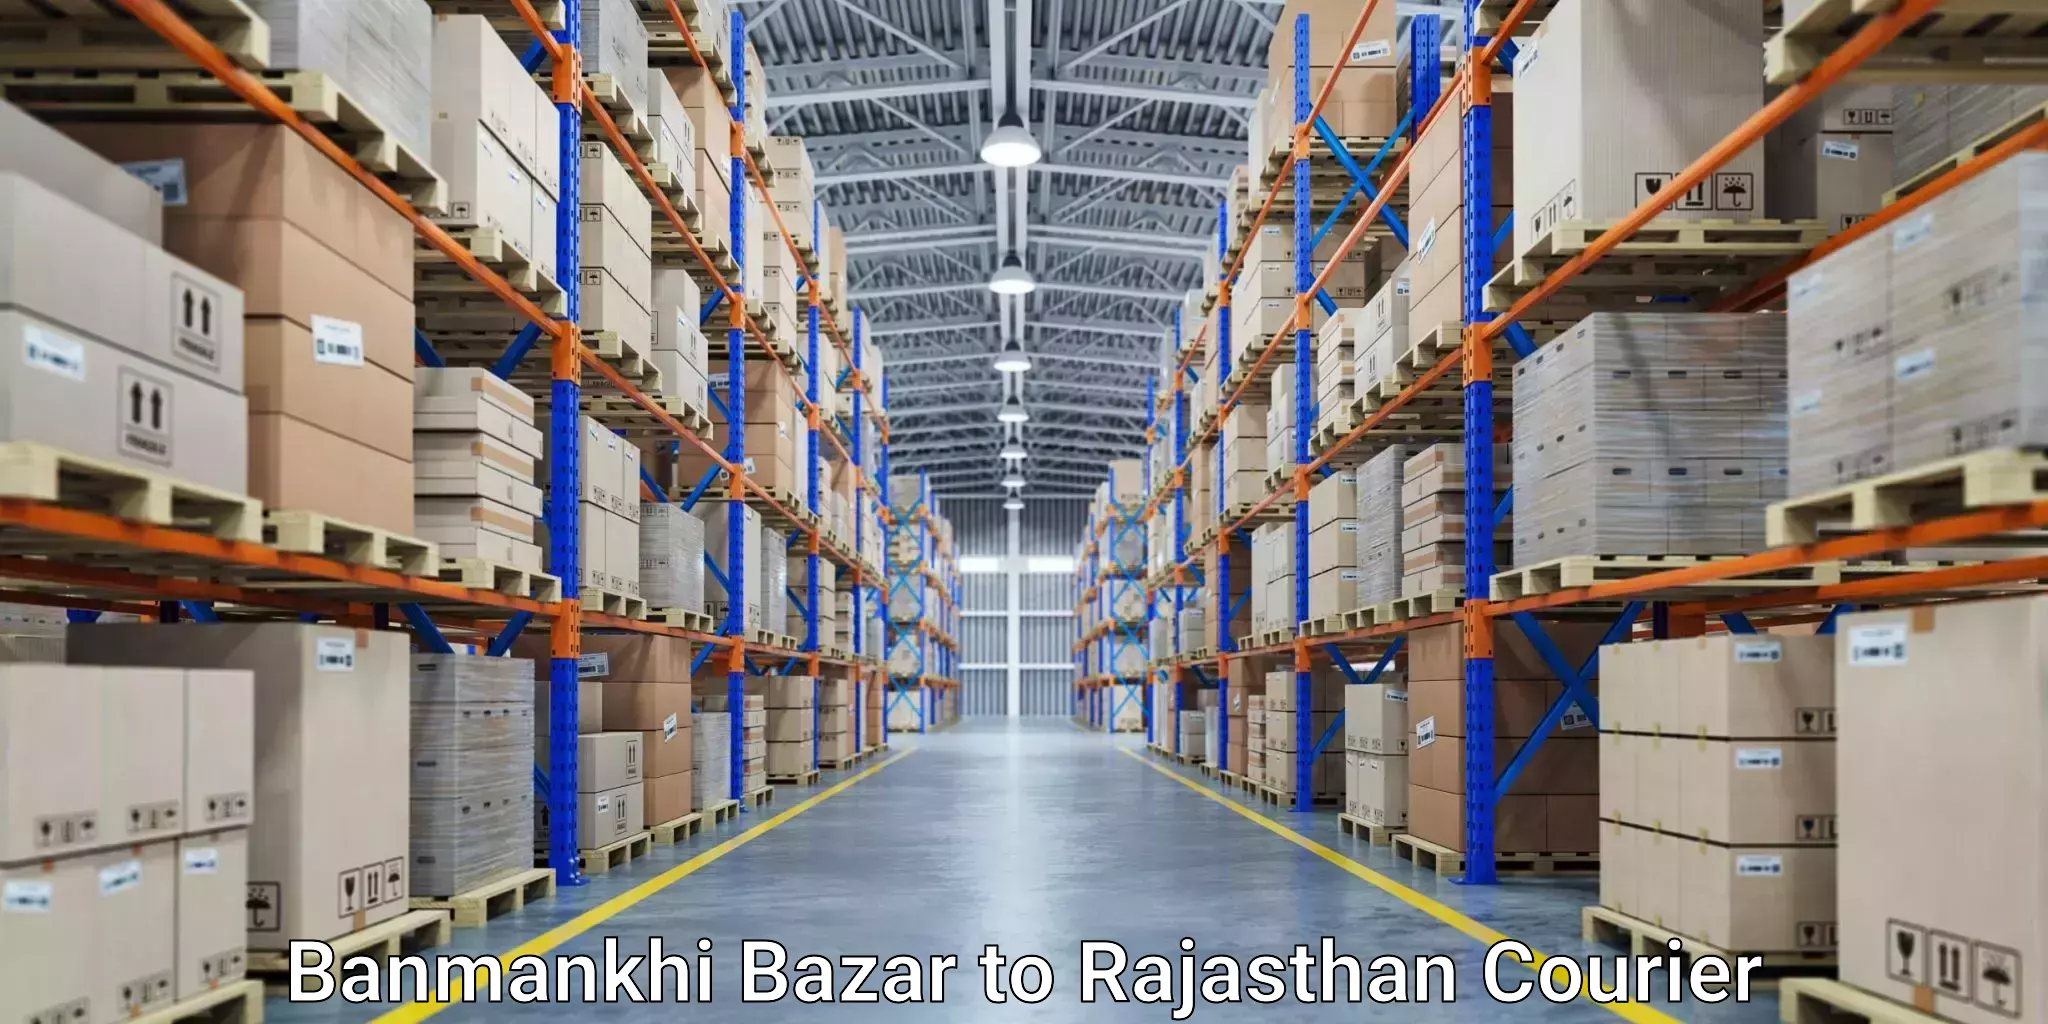 Global freight services Banmankhi Bazar to Rajasthan